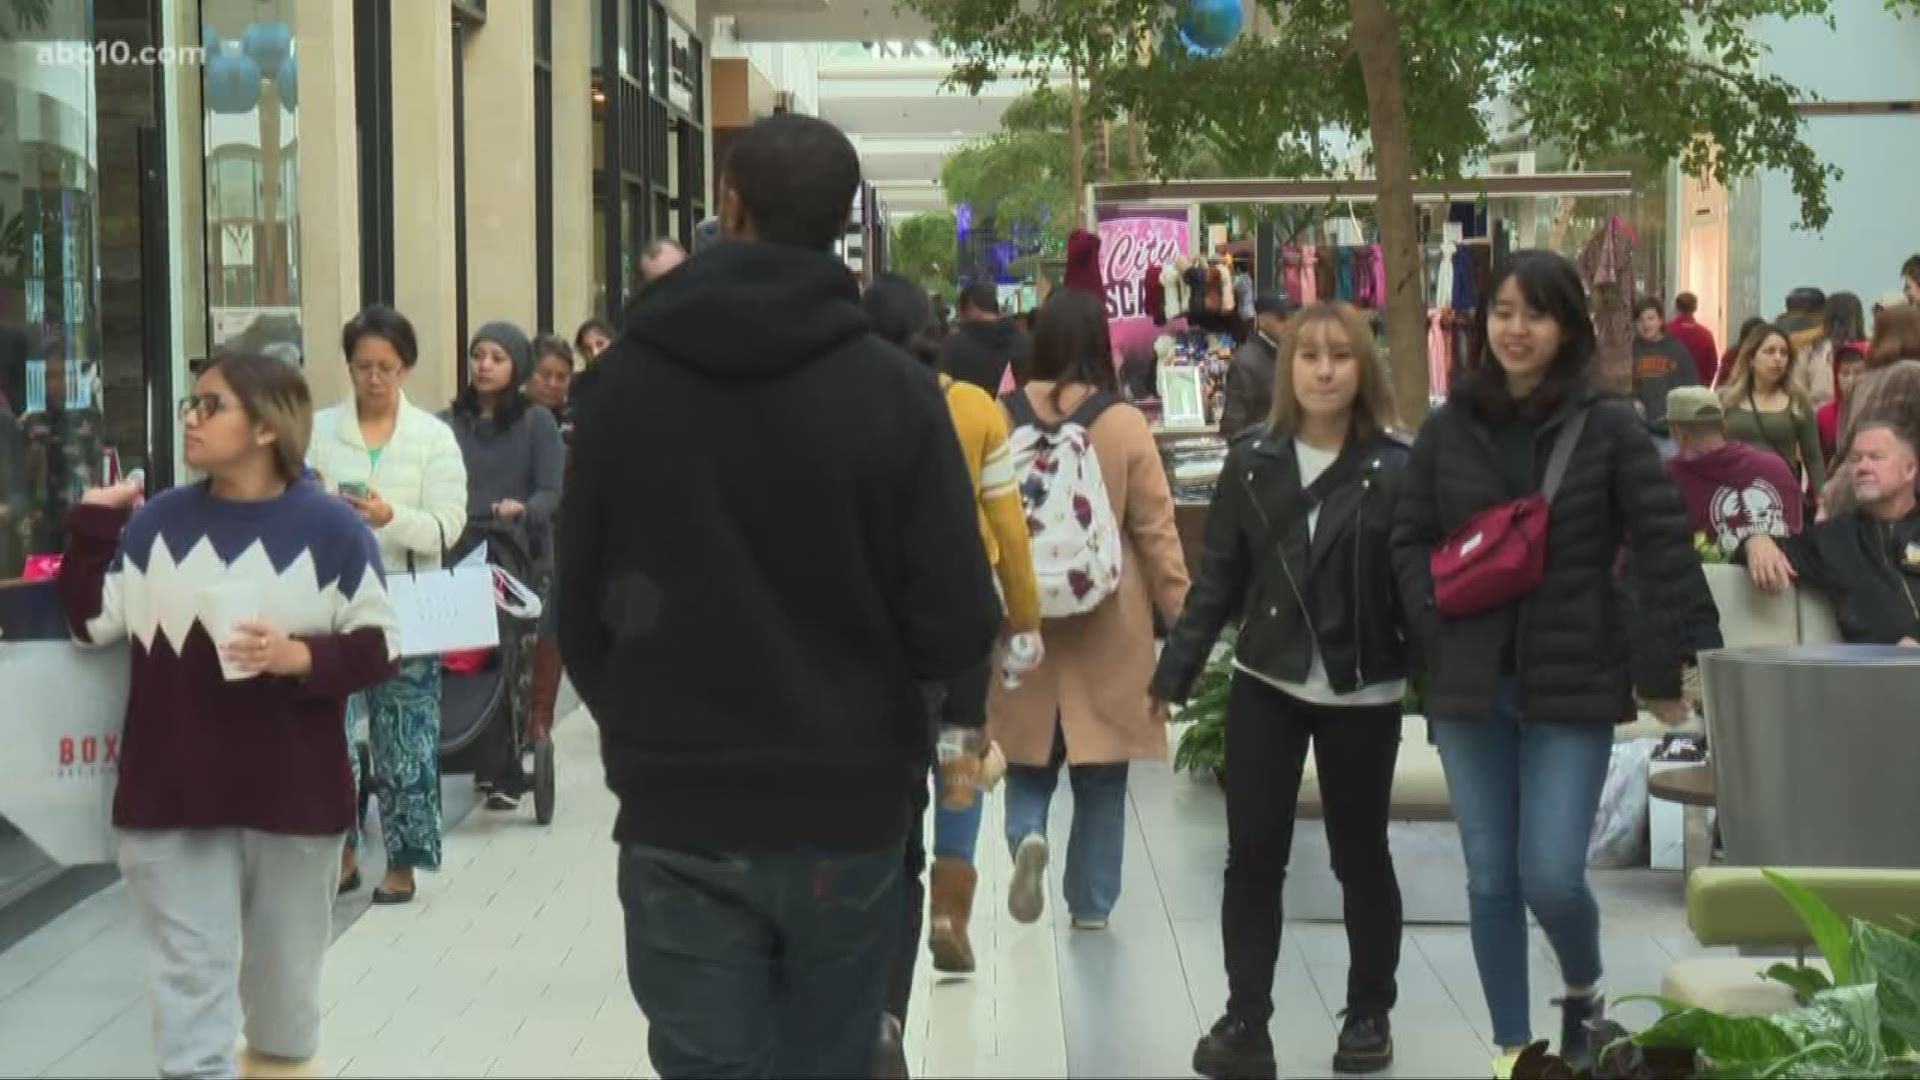 Arden Fair Mall in Sacramento is offering free holiday shuttle service for shoppers. Visitors can park at Cal Expo and get a ride to the mall.